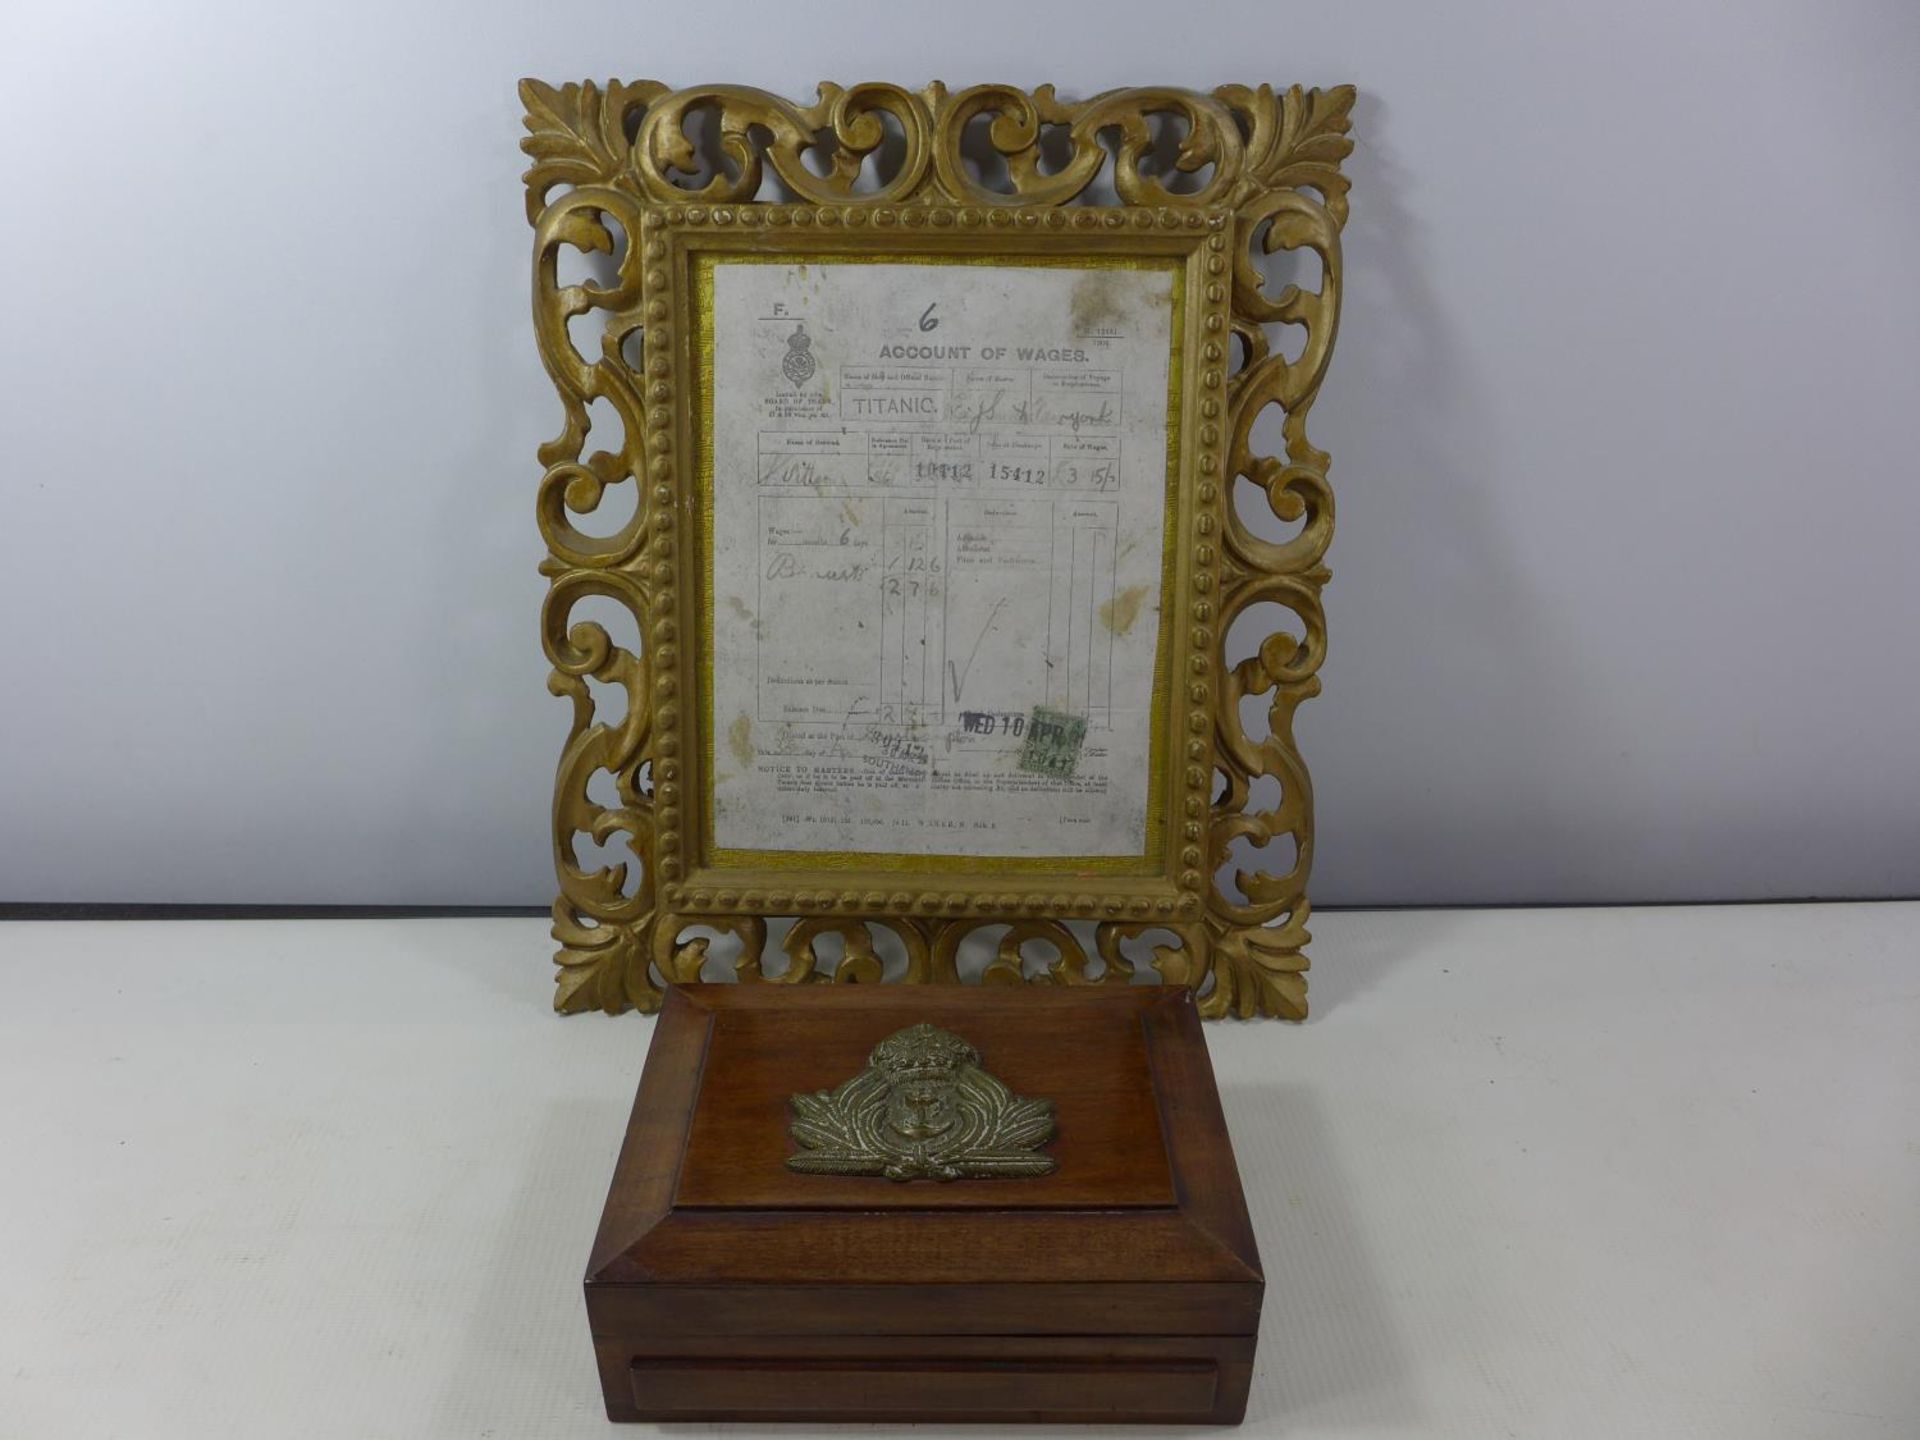 A MAHOGANY BOX WITH BRASS NAVAL BADGE AND A FRAMED ACCOUNT OF WAGES MARKED TITANIC, DATED 1912, 22 X